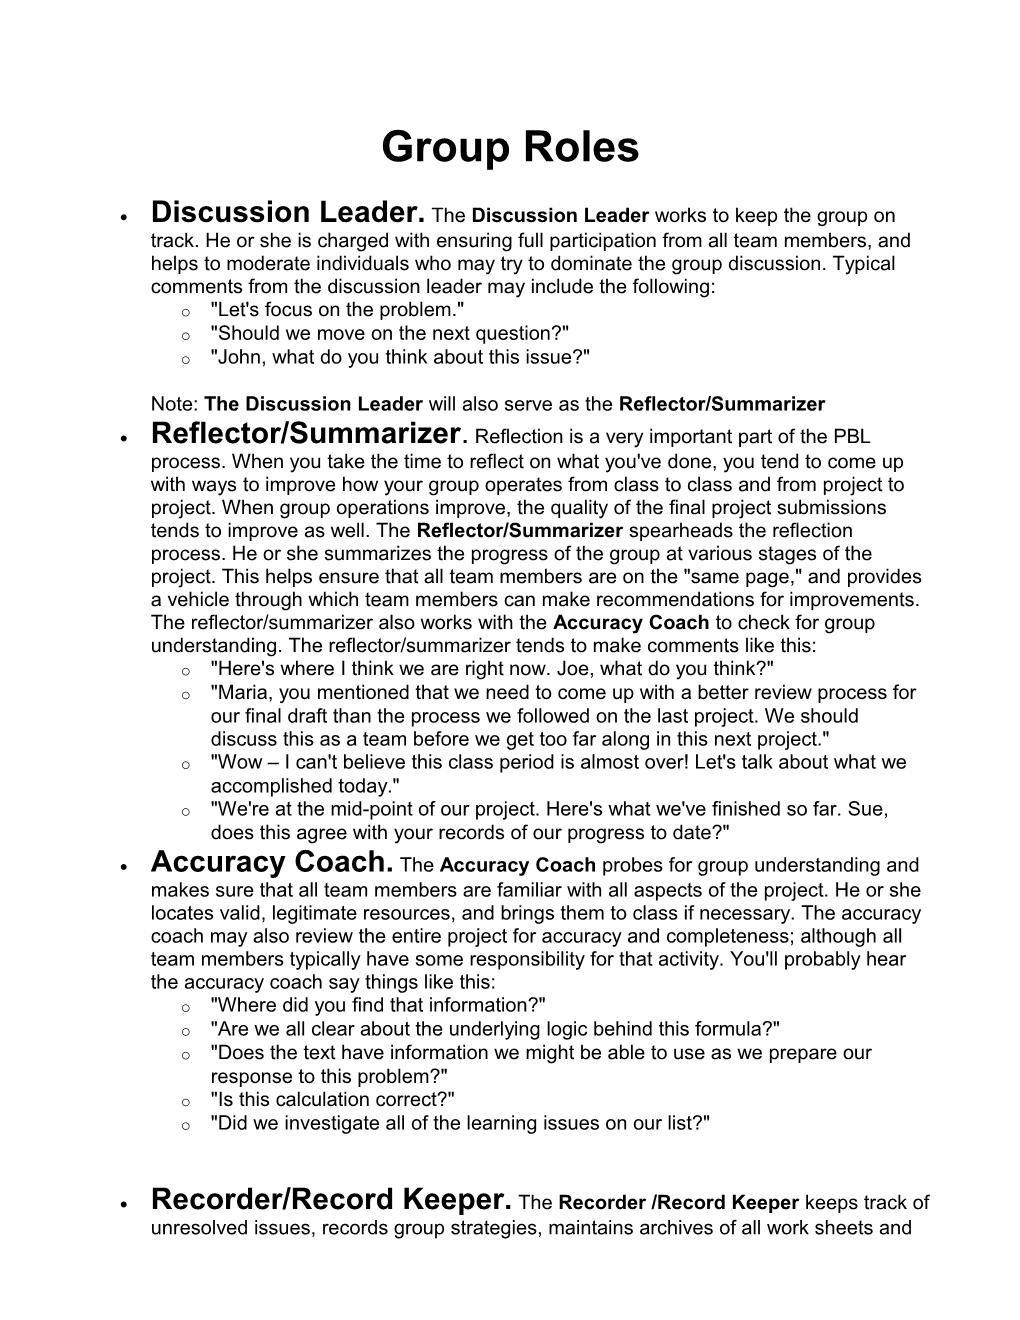 Note: the Discussion Leader Will Also Serve As the Reflector/Summarizer